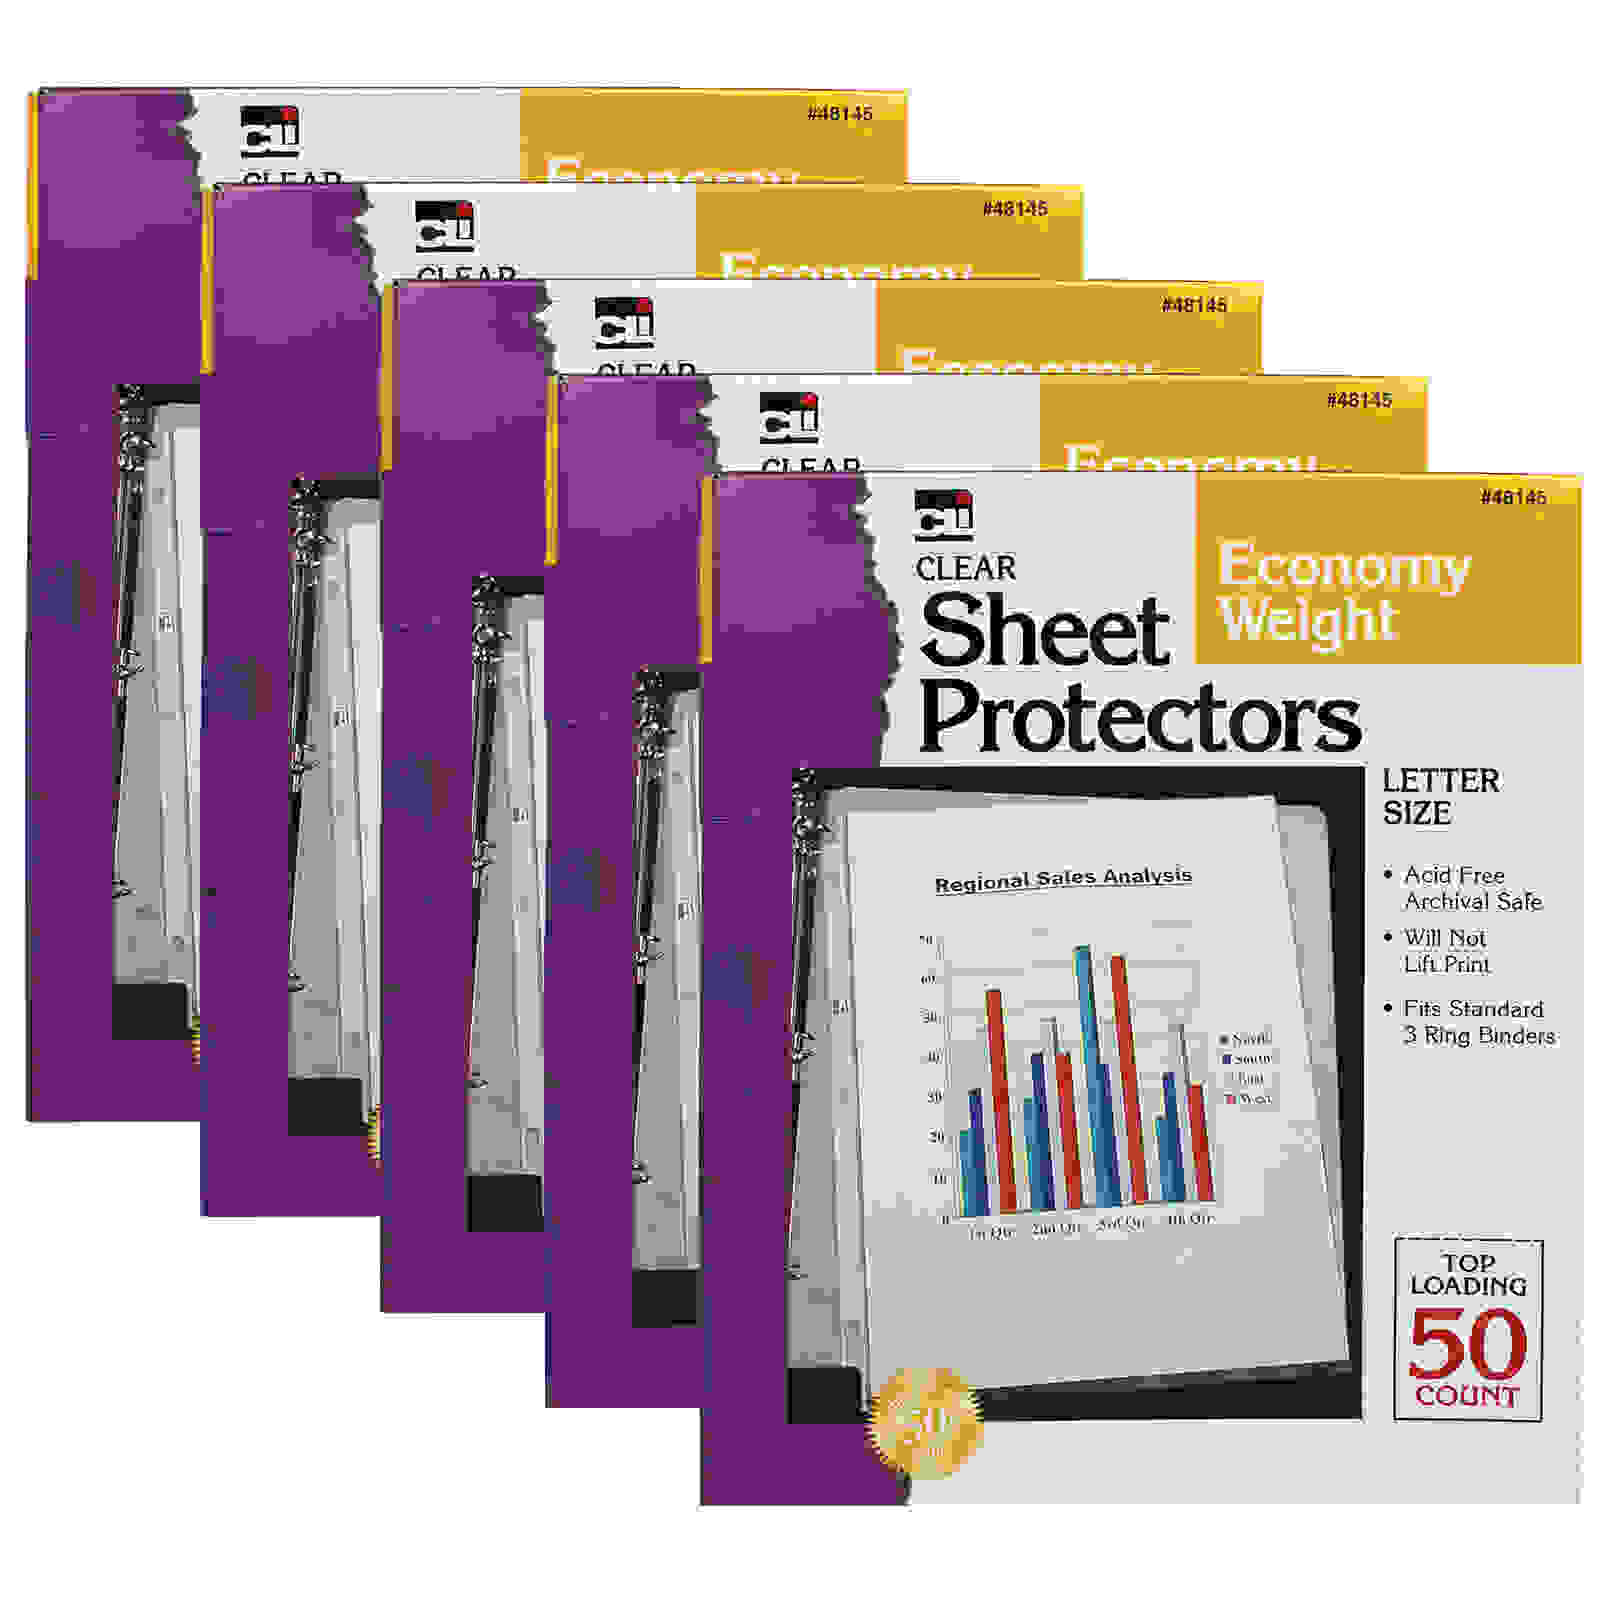 Sheet Protectors, Economy Weight, Letter Size, Clear, 50 Per Box, 5 Boxes